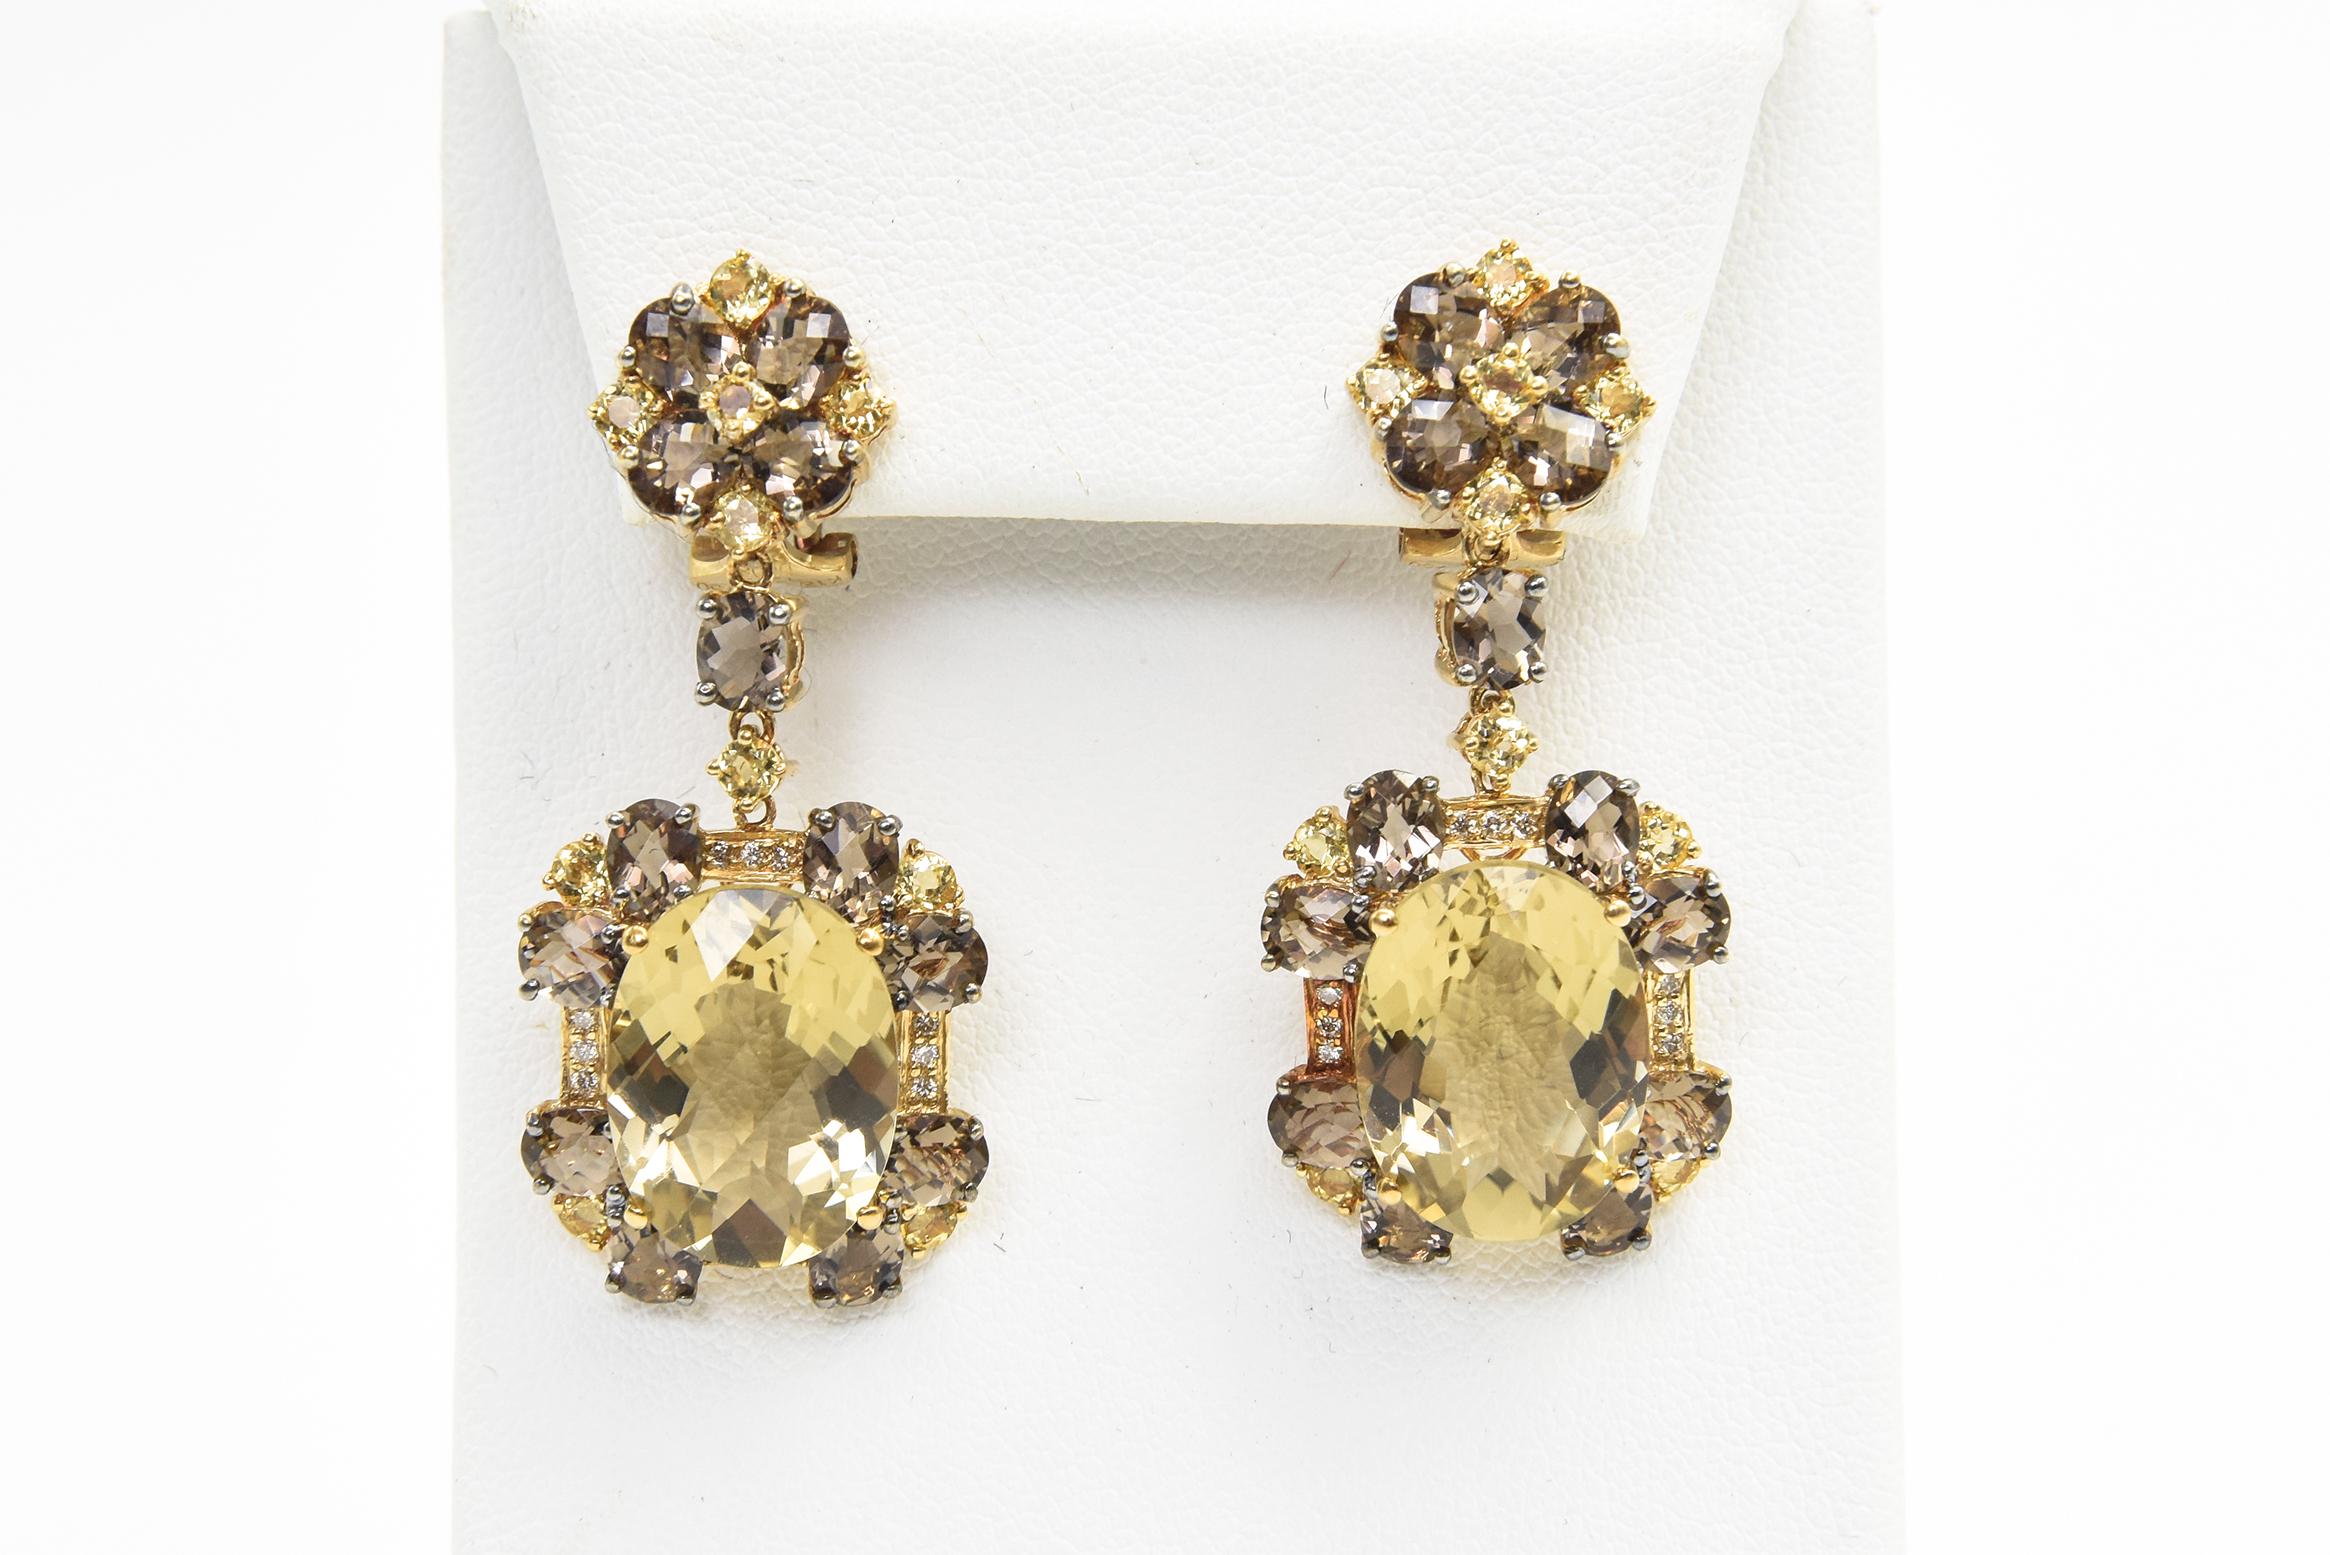 Beautiful dangling 18k yellow gold dangling earrings featuring a yellow beryl & smoky topaz flower on ear which leads to dangling framed oval lemon quartz with diamond and yellow beryl and smoky topaz accents.  